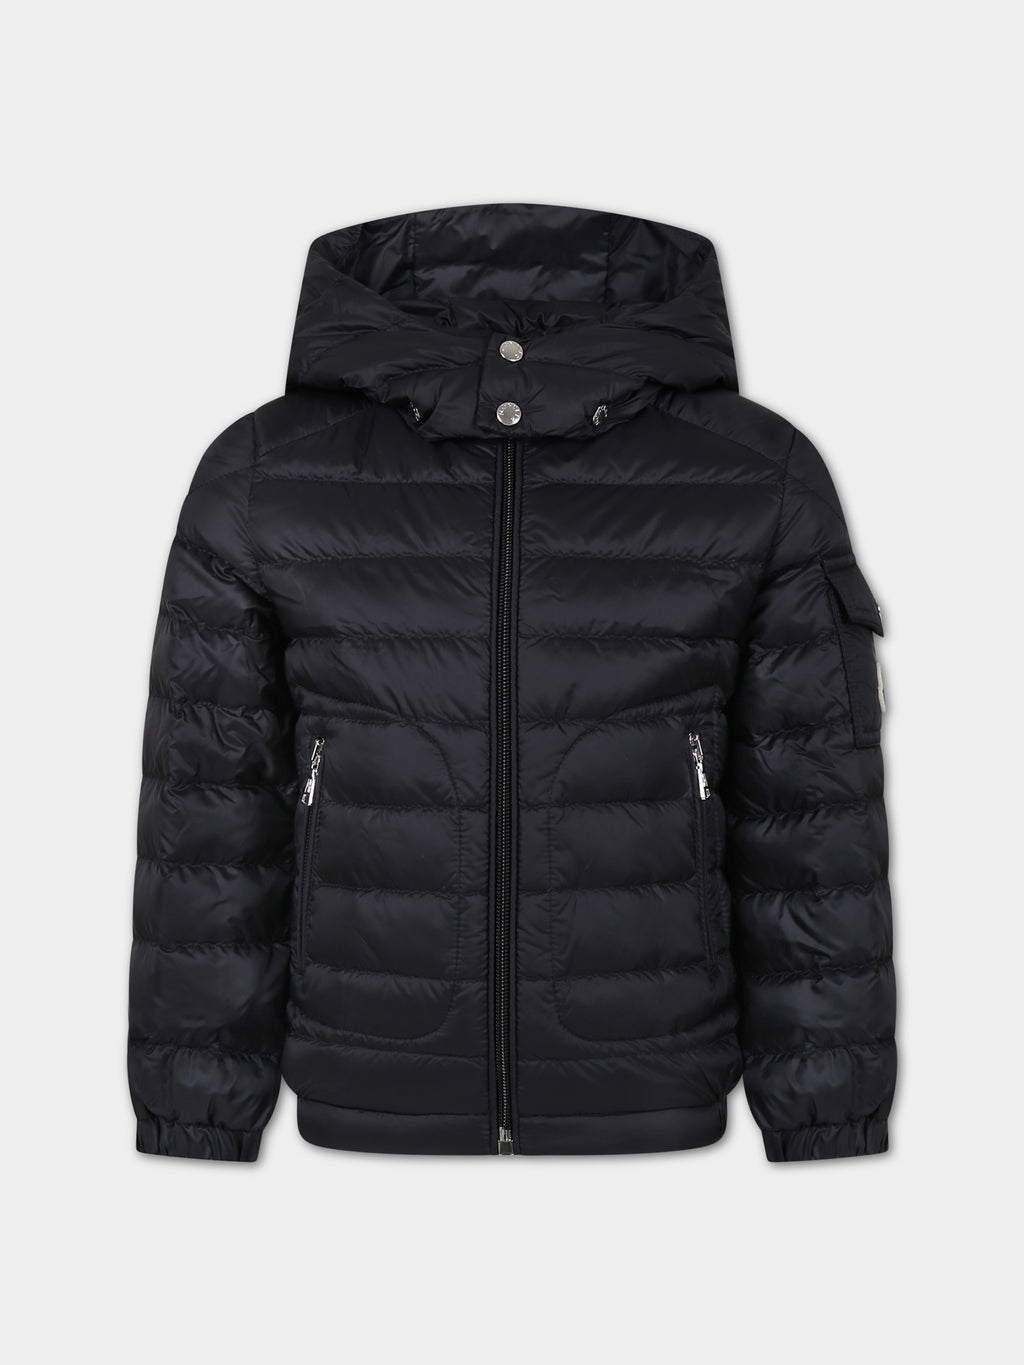 Lauros black down jacket with black hood for boy